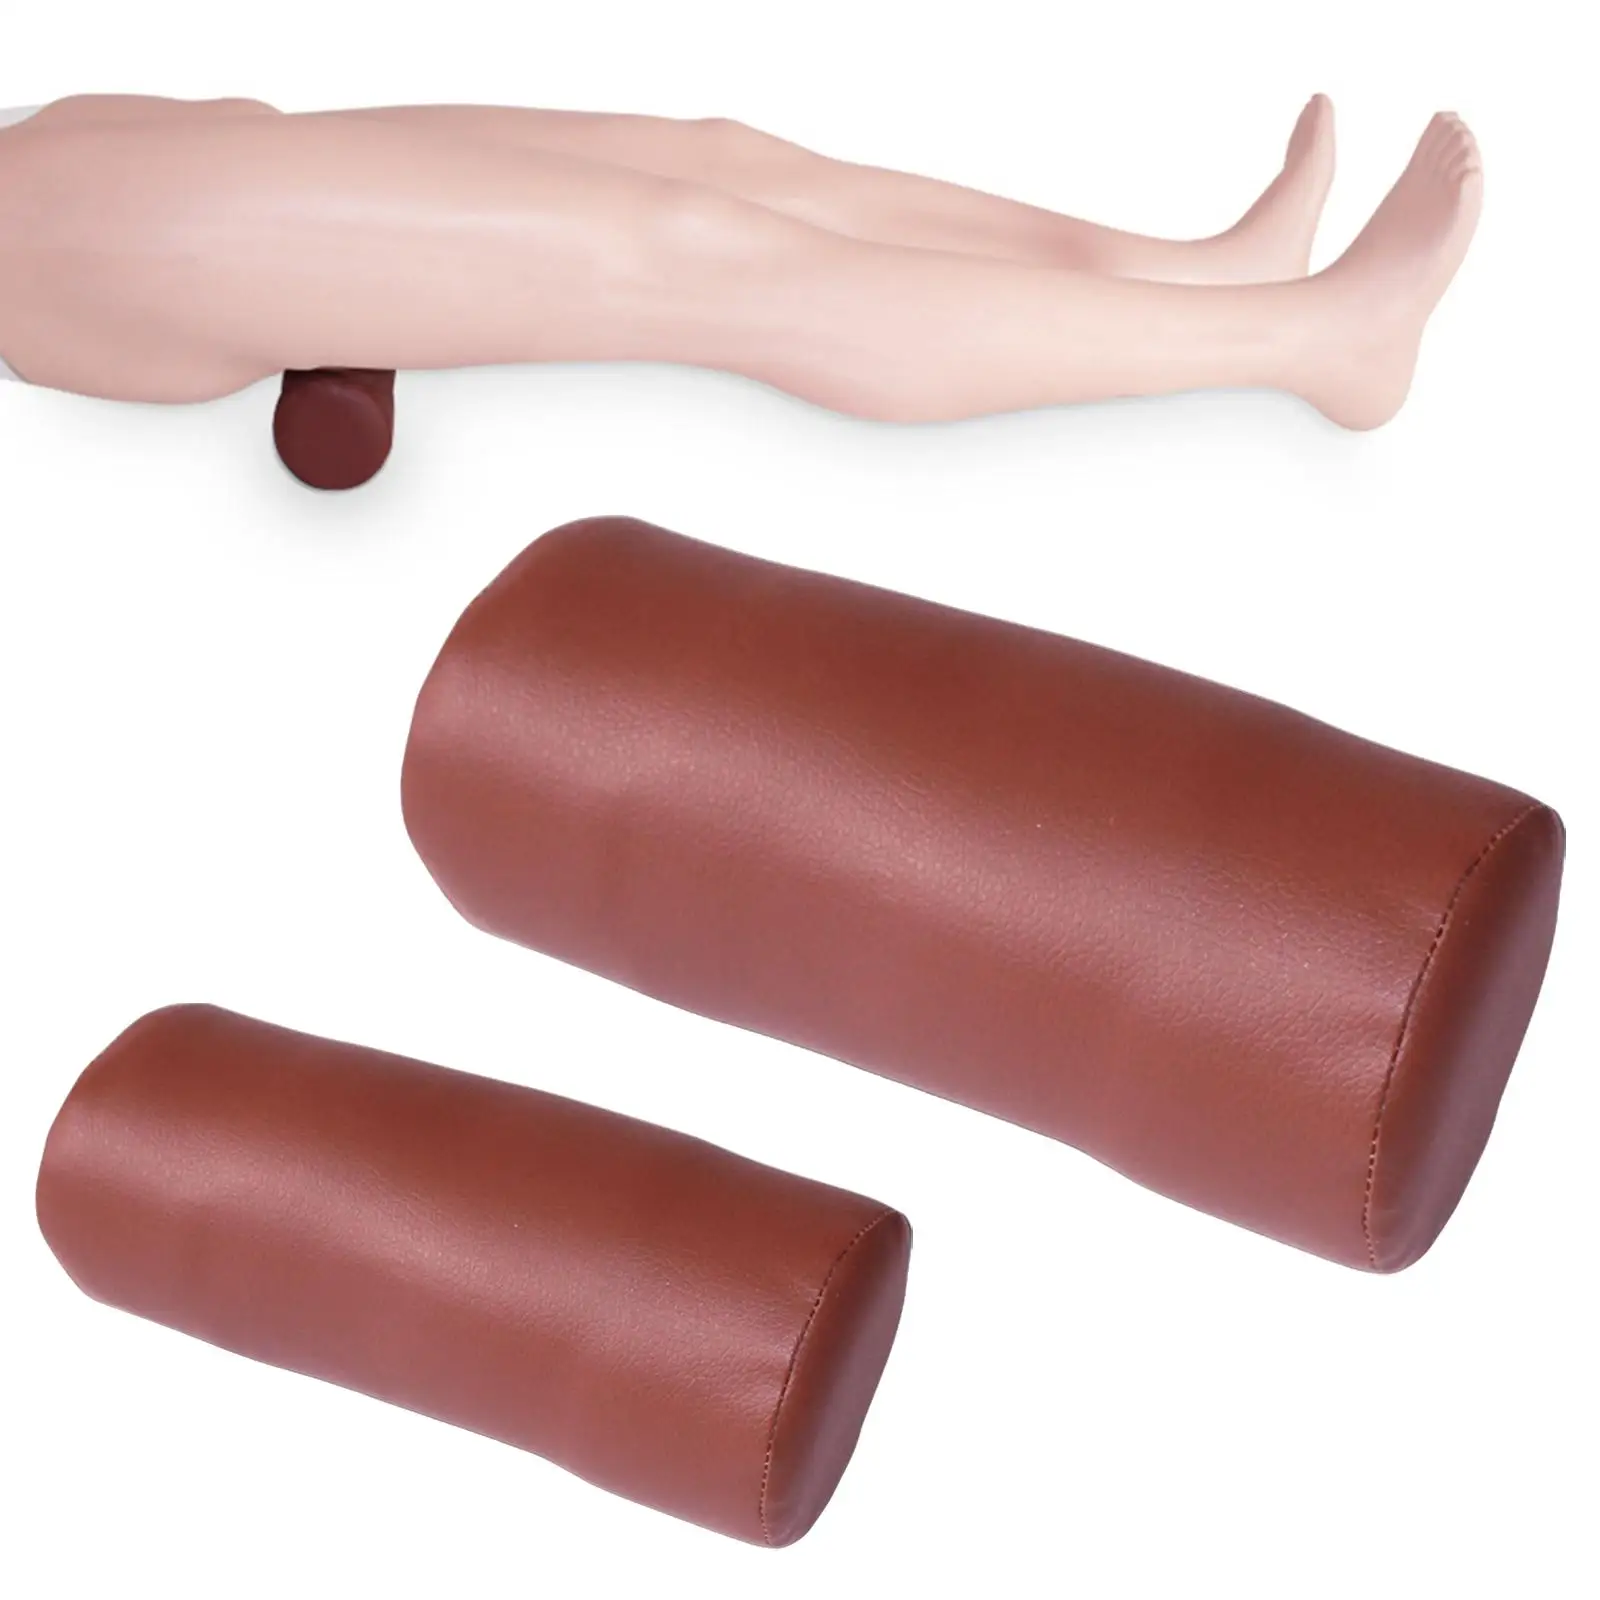 Cylinder Pillow Provides Support Adjustable Inserts Cushion Pad for Neck Knee